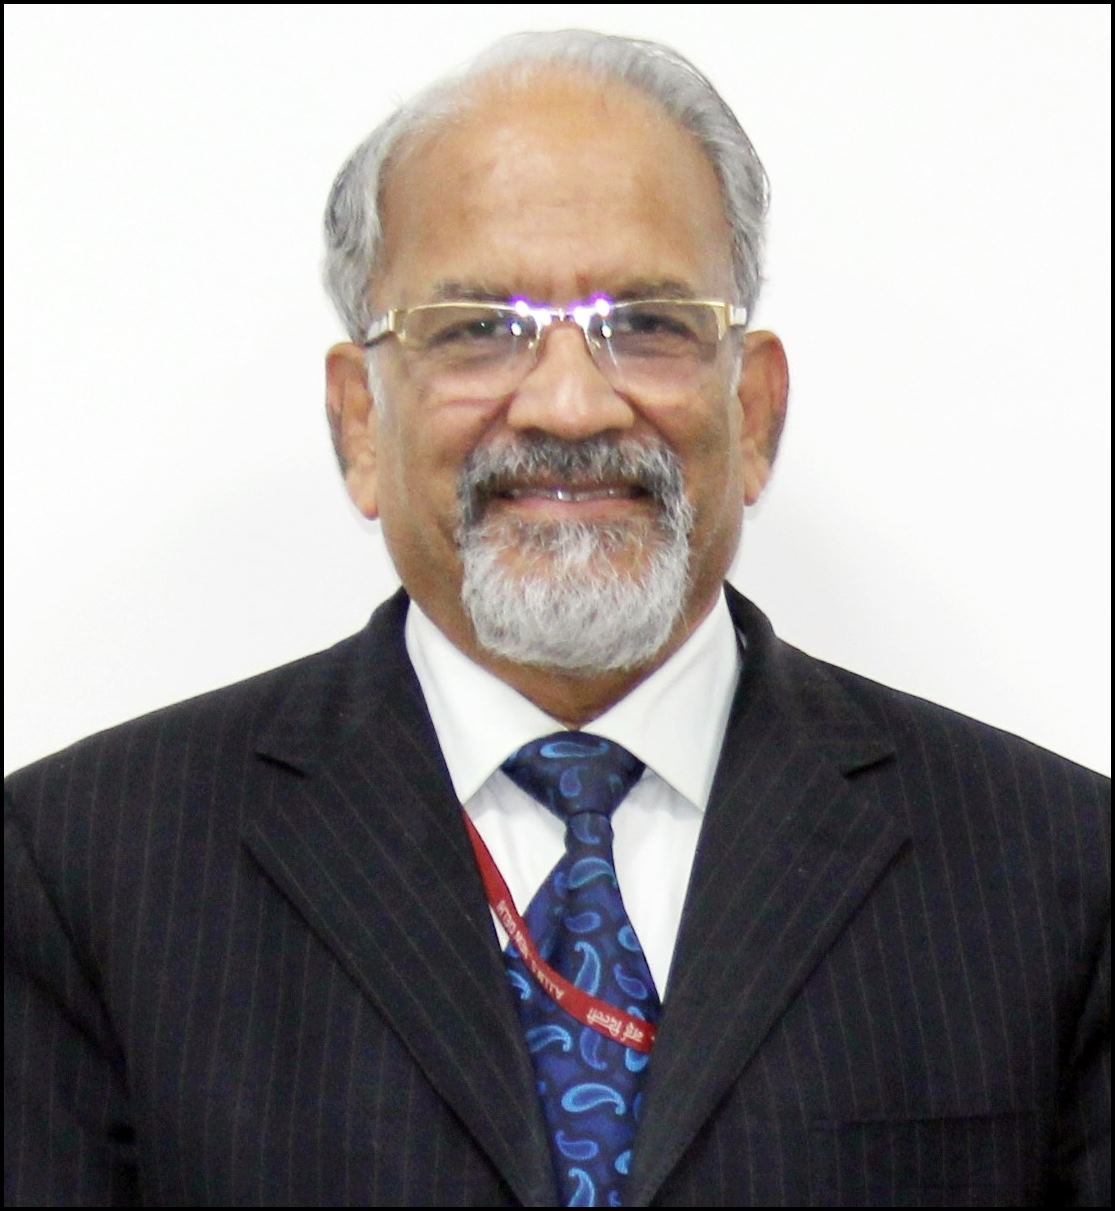 Dr. (Prof) Y. K. Gupta, <span>President <br> All India Institute of Medical Sciences (AIIMS), Bhopal</span>